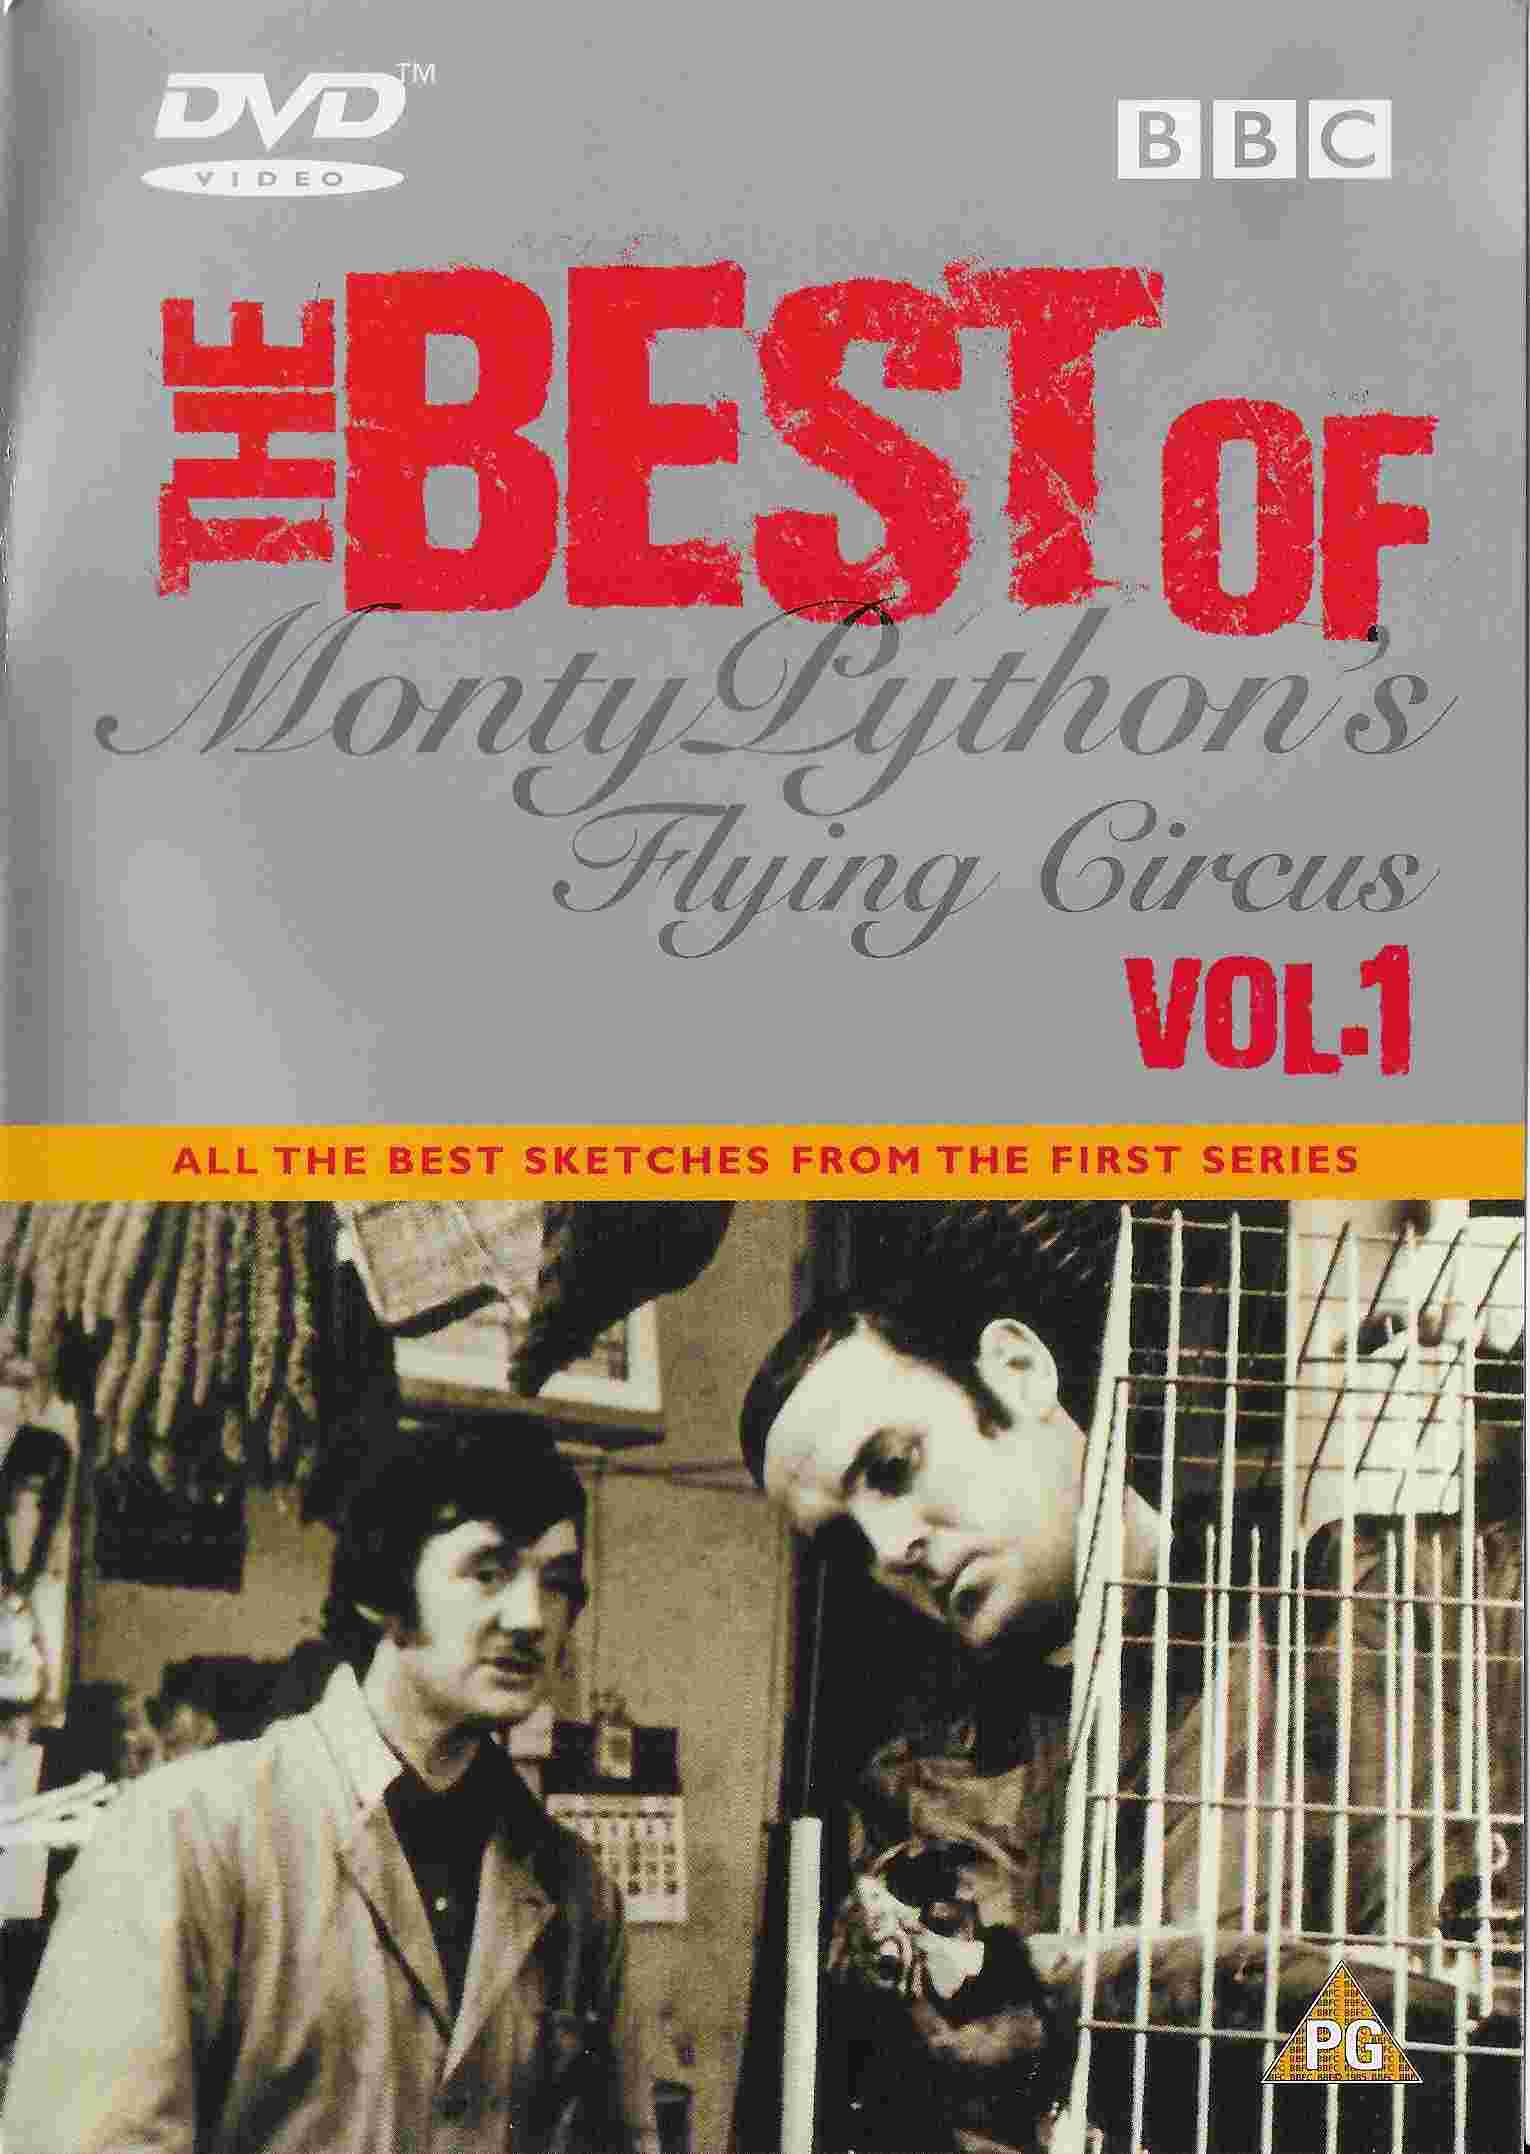 Picture of BBCDVD 1005 The best of Monty Python's flying circus - Volume 1 by artist Monty Python from the BBC dvds - Records and Tapes library